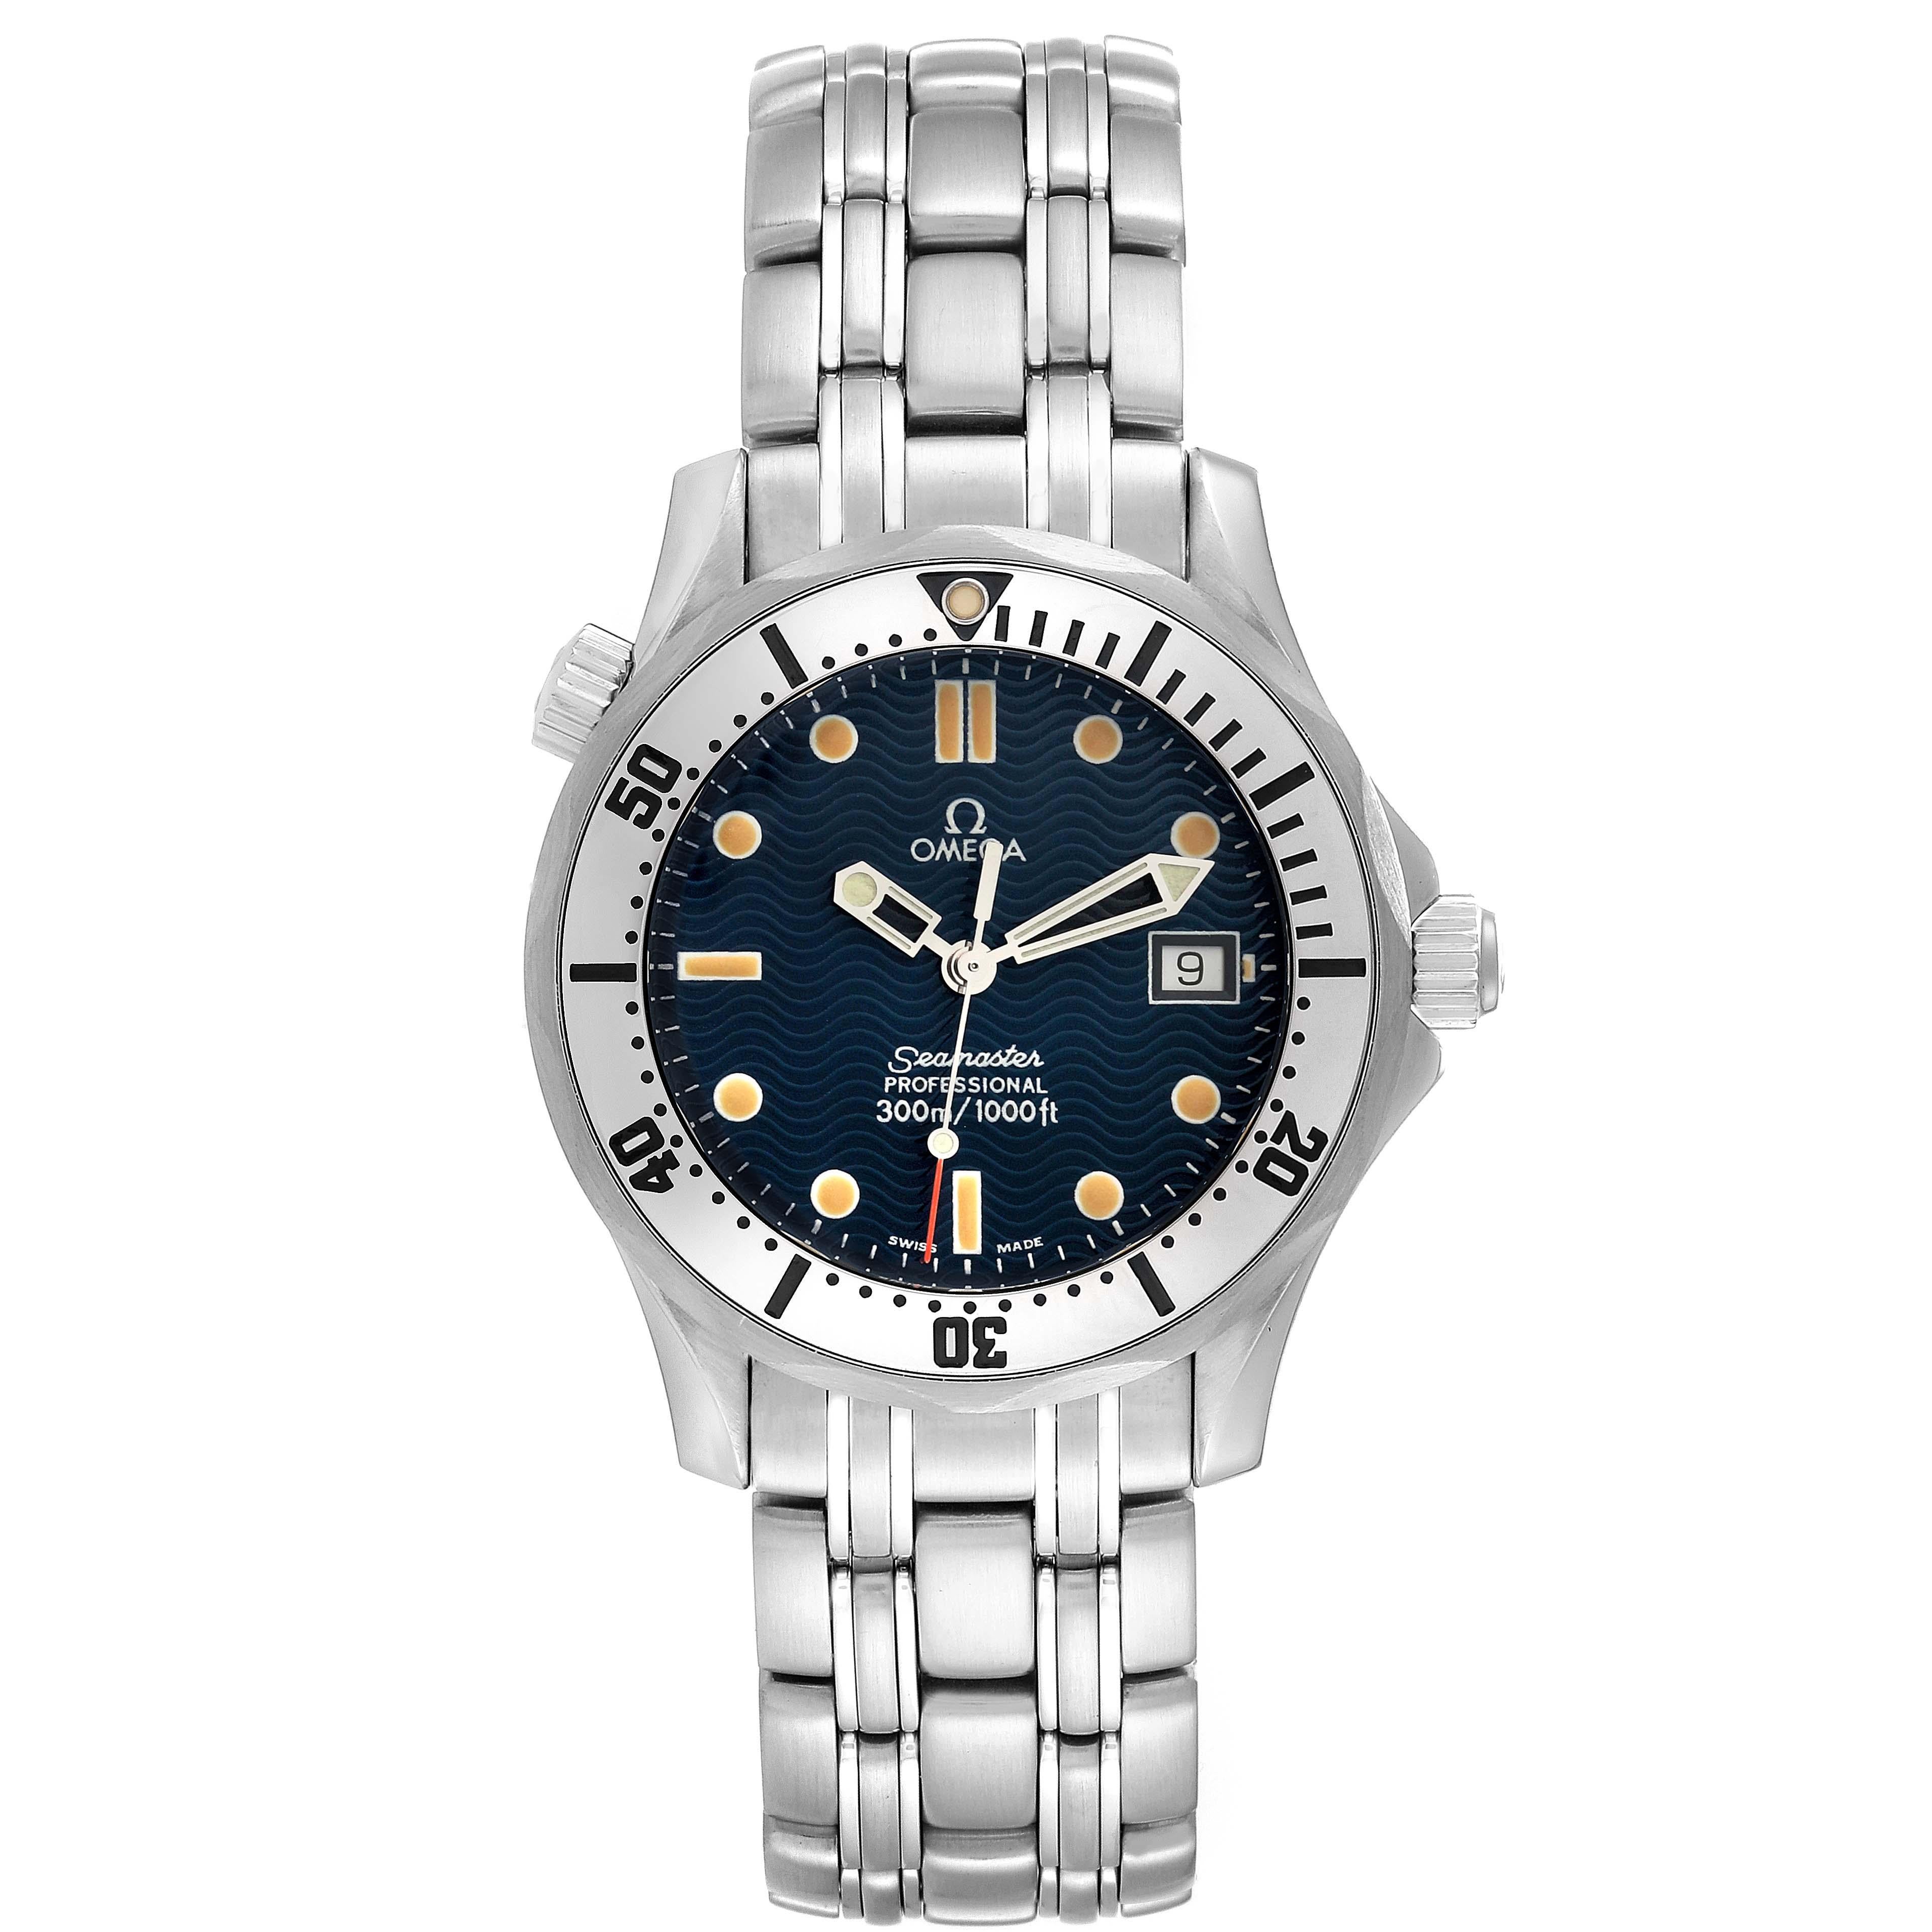 Omega Seamaster 300m Midsize 36mm Steel Mens Watch 2562.80.00. Quartz movement. Stainless steel case 36.25 mm in diameter. Omega logo on a crown. Unidirectional rotating stainless steel bezel. Scratch resistant sapphire crystal. Blue wave decor dial